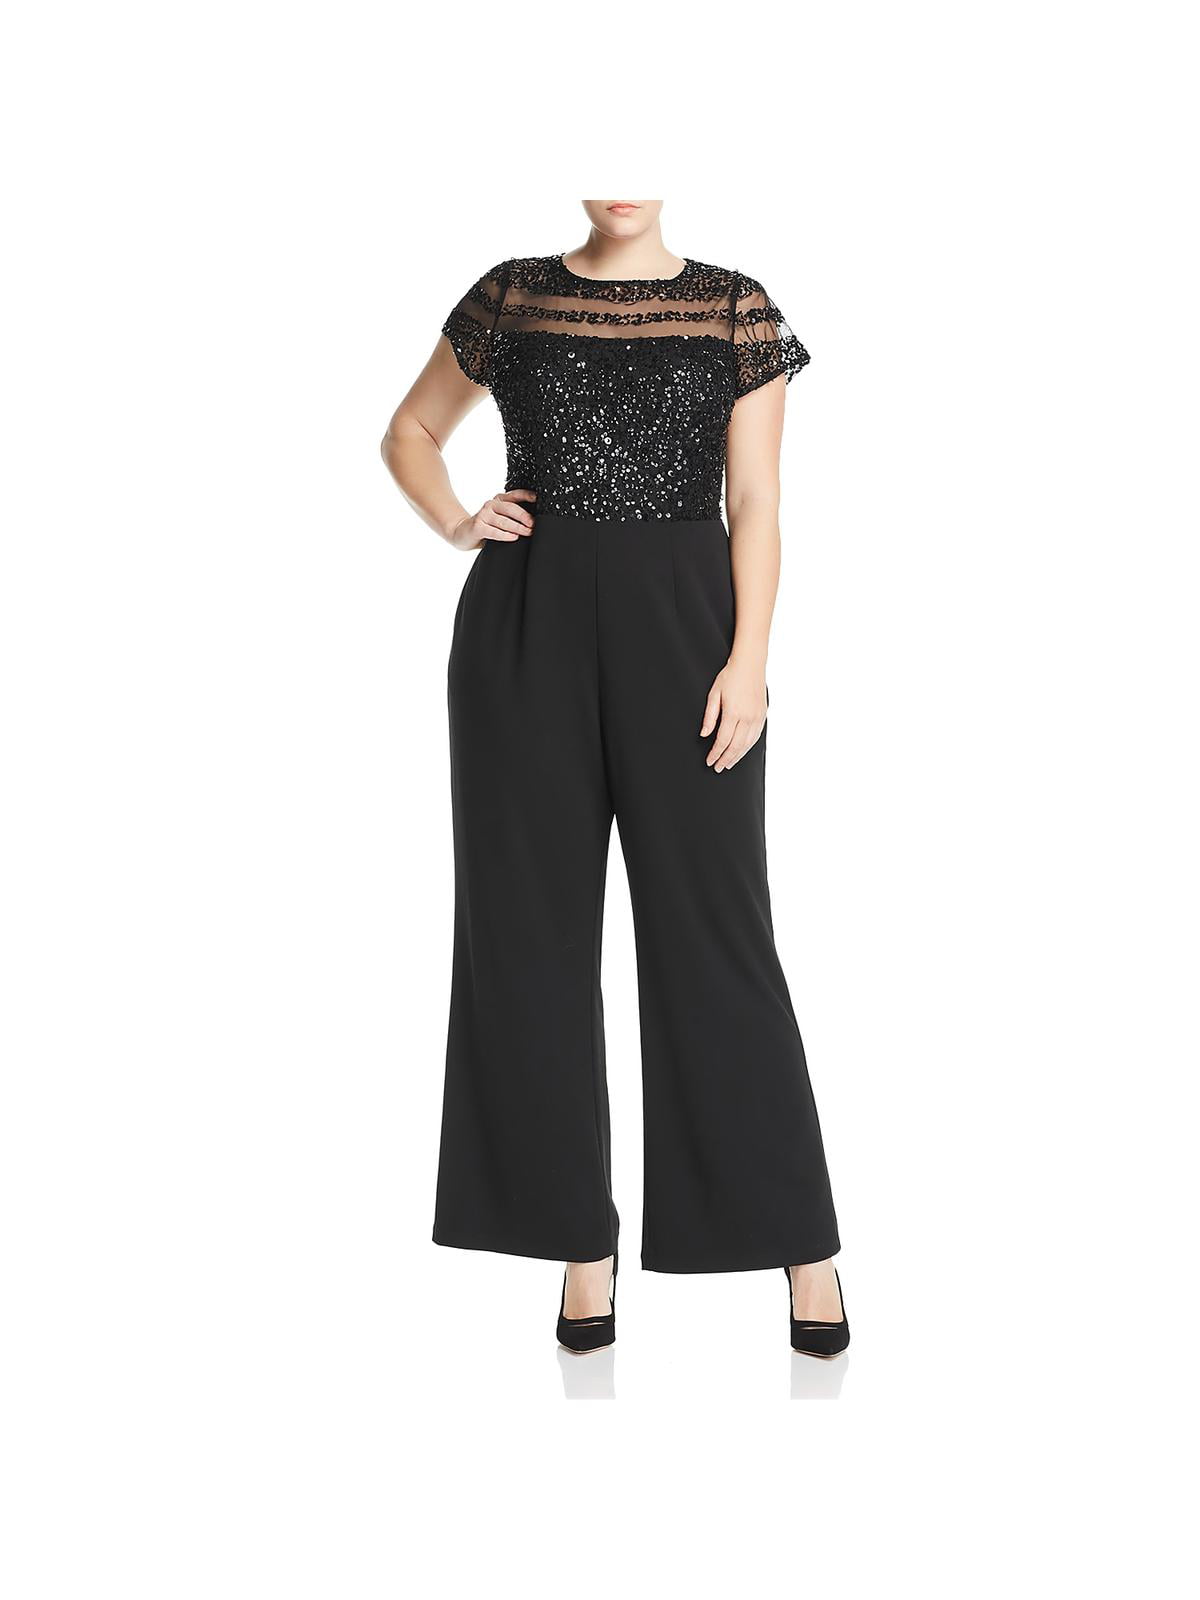 Adrianna Papell - Adrianna Papell Womens Sequin Illusion Jumpsuit ...